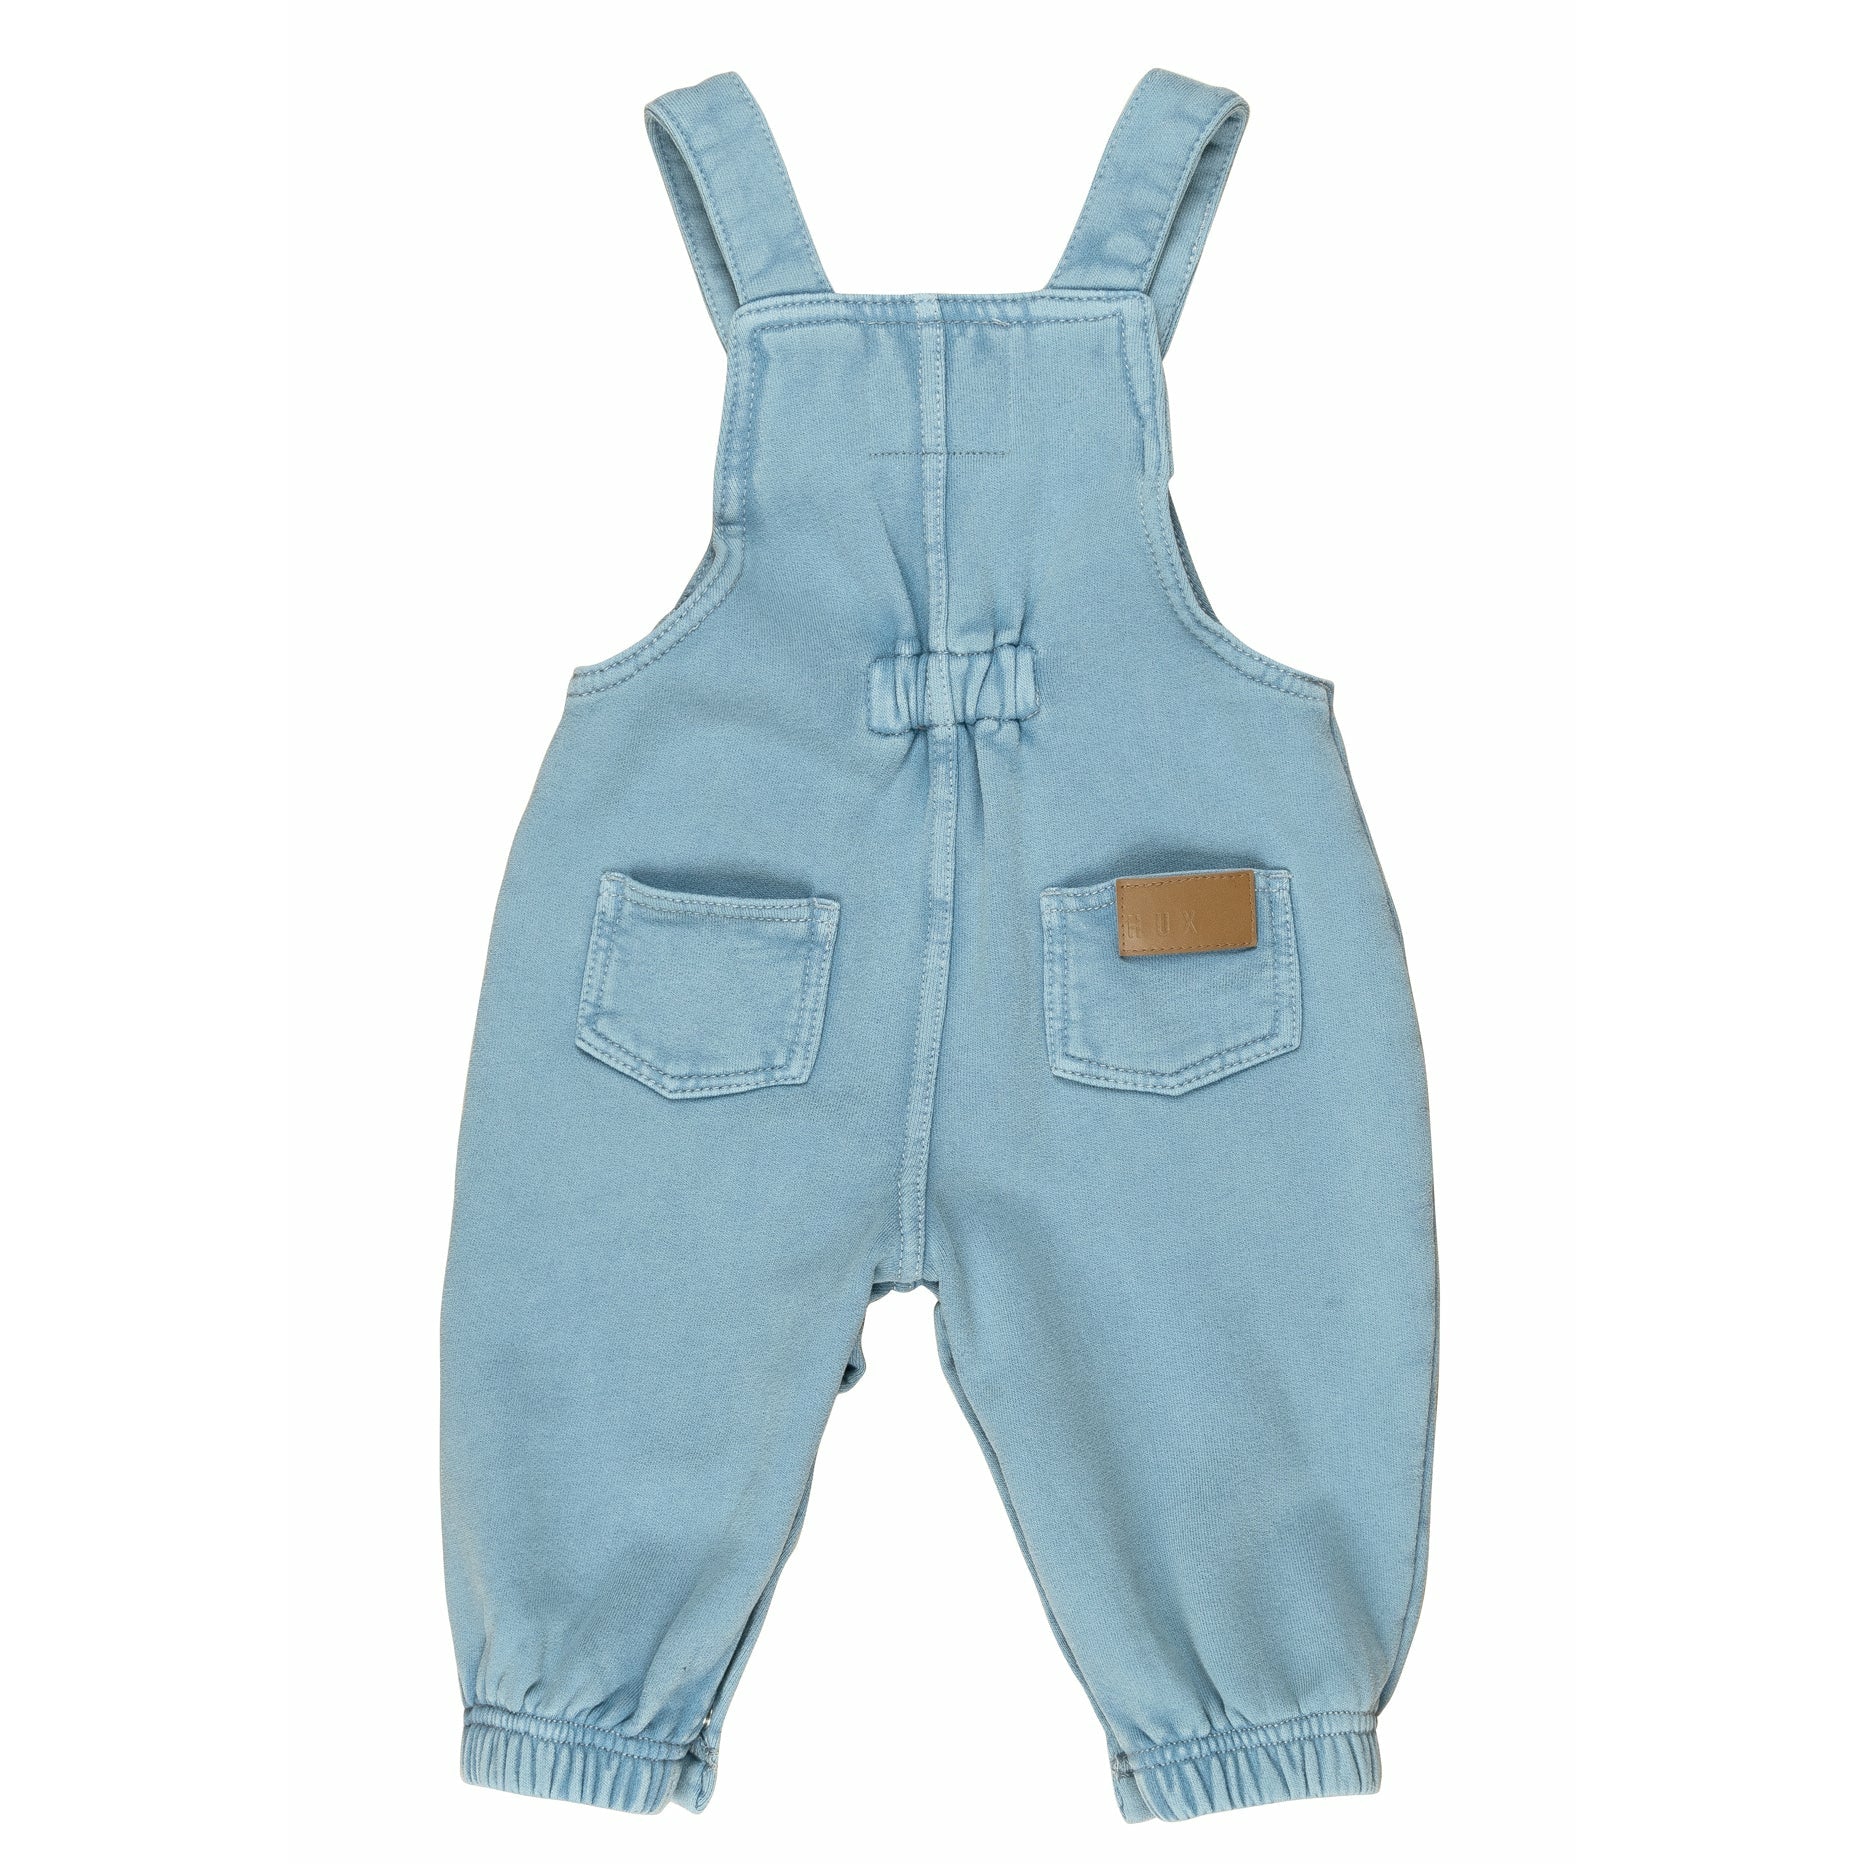 Vintage Terry Overall